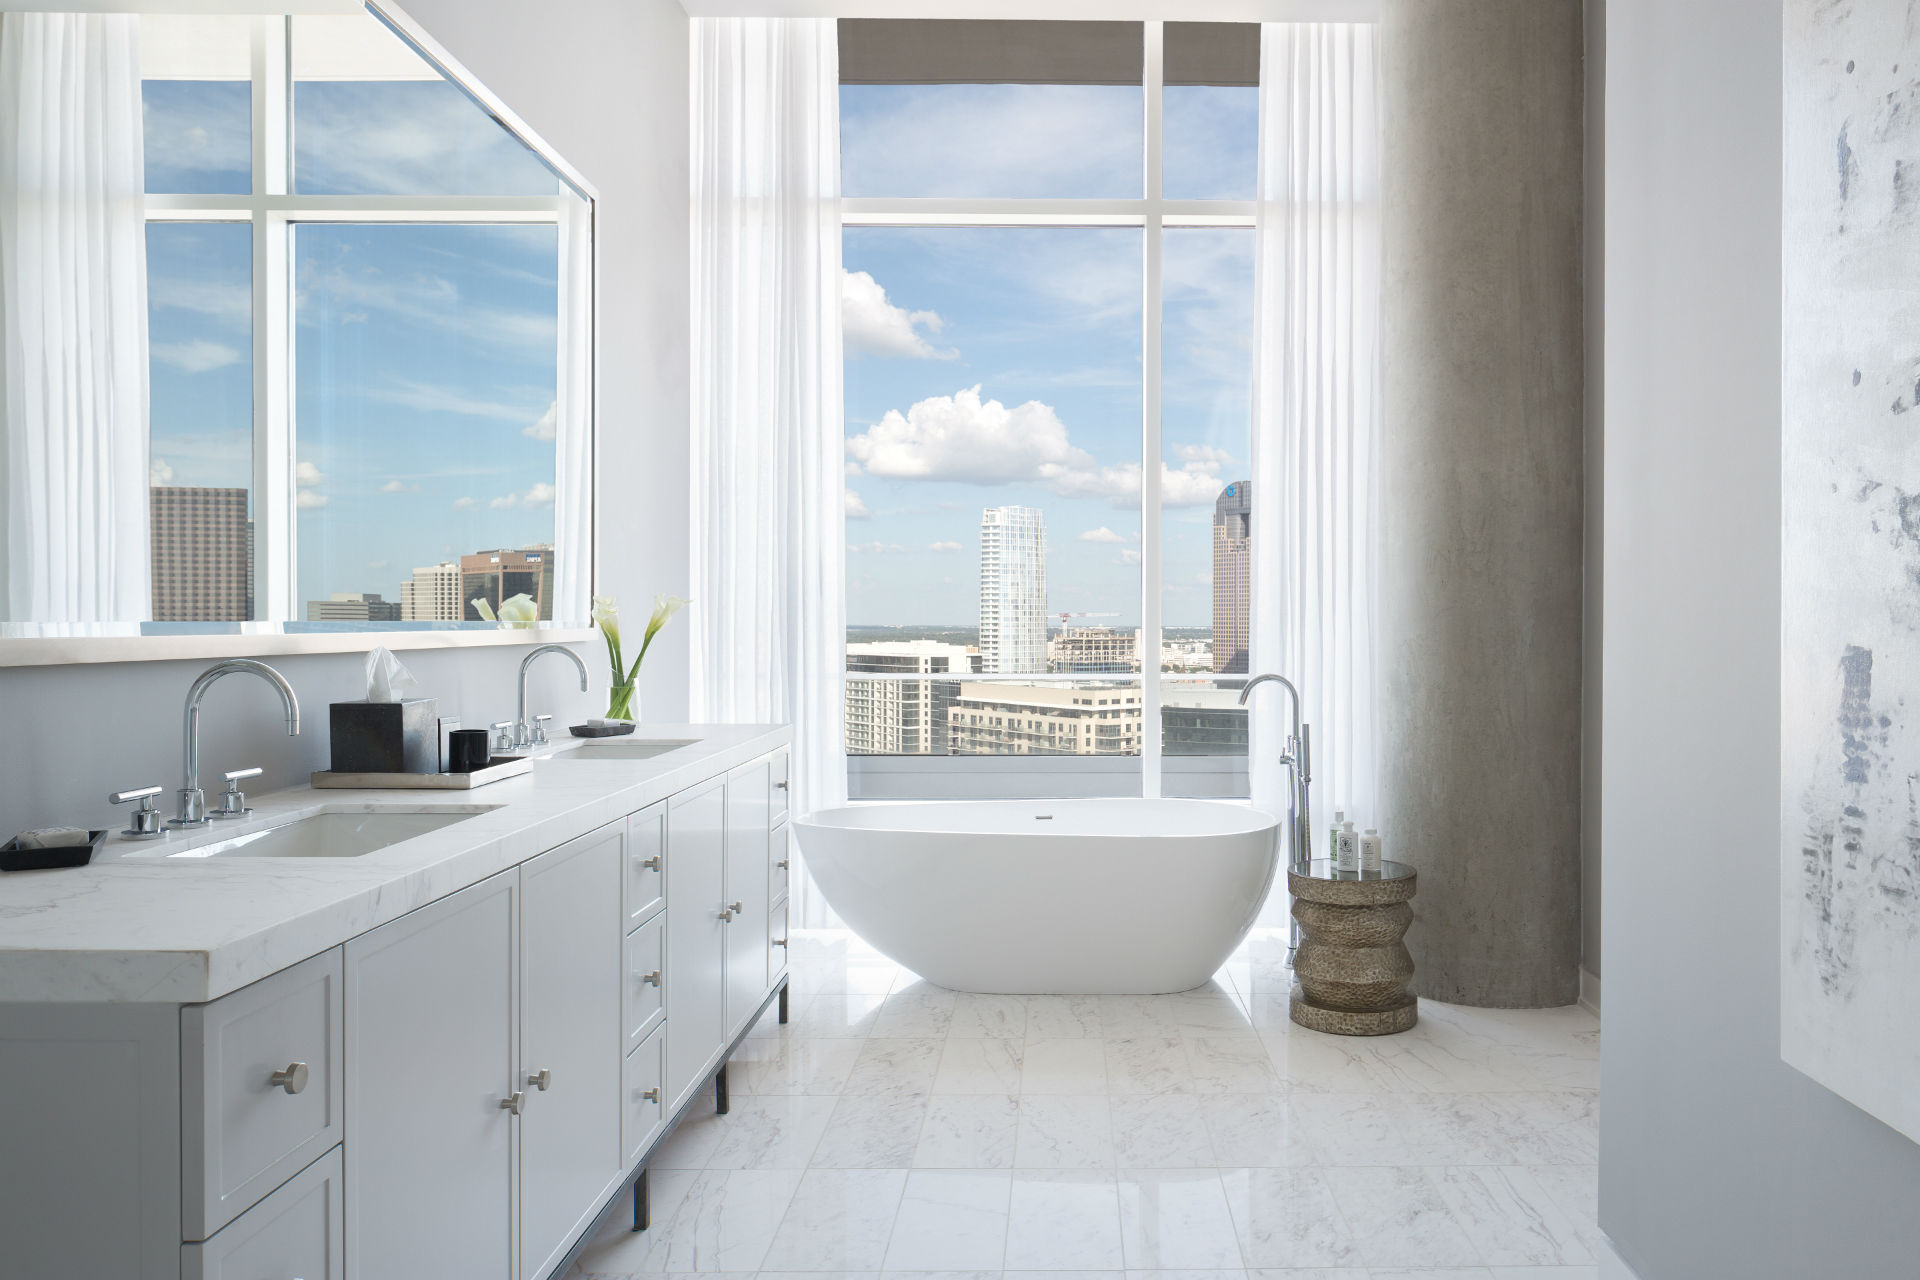 Standing Bath Interior Free Standing Bath Tubs Design Interior Using White Color And Minimalist Shape Combined With White Bathroom Vanity Style Bathroom Free Standing Bath Tubs With Gorgeous Design And Style